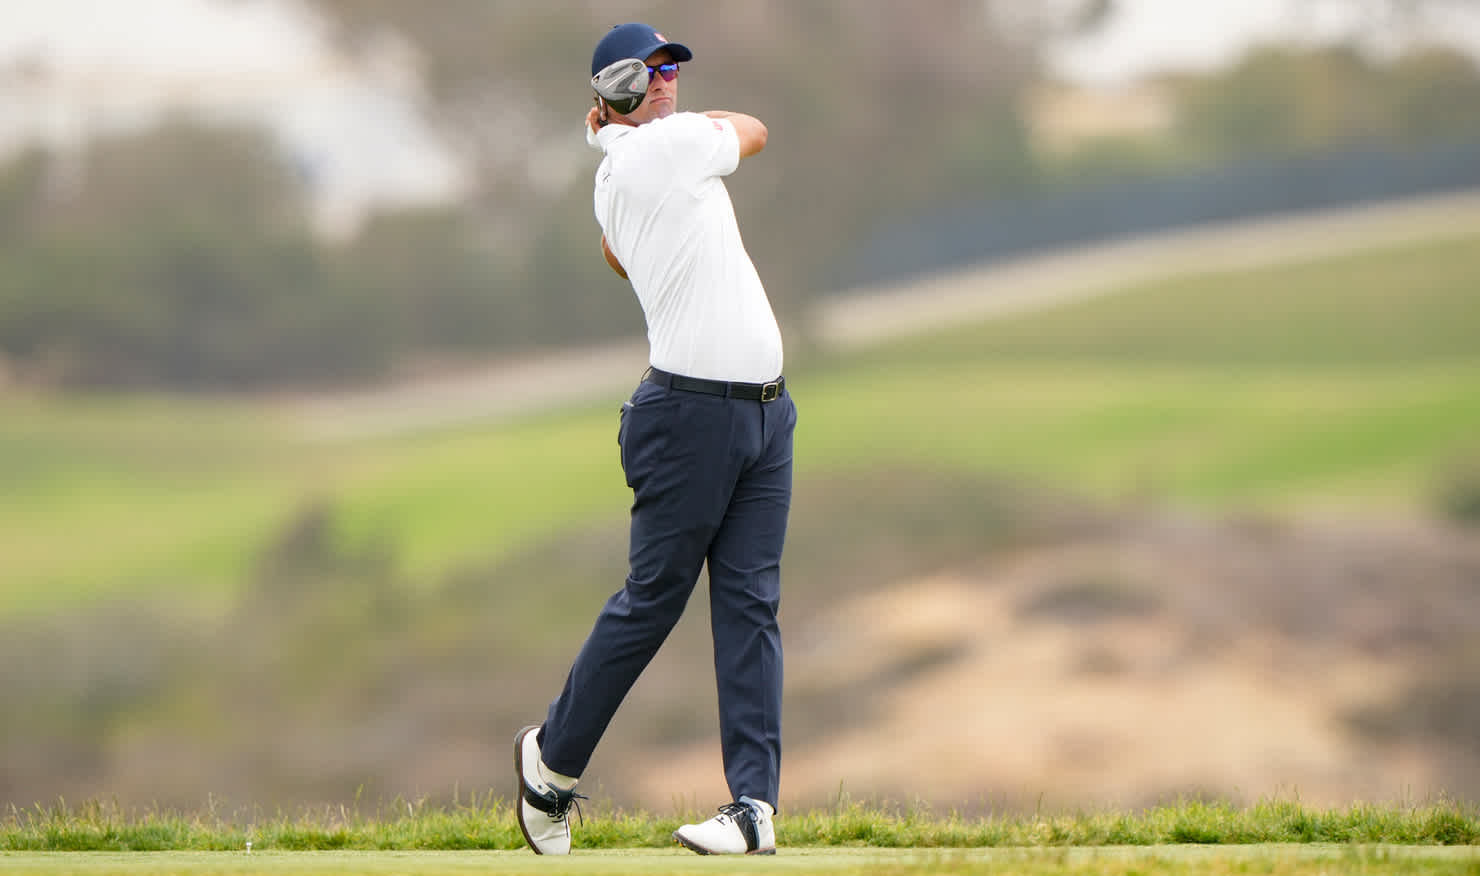 Adam Scott lashes a drive at Torrey Pines today. Picture: USGA